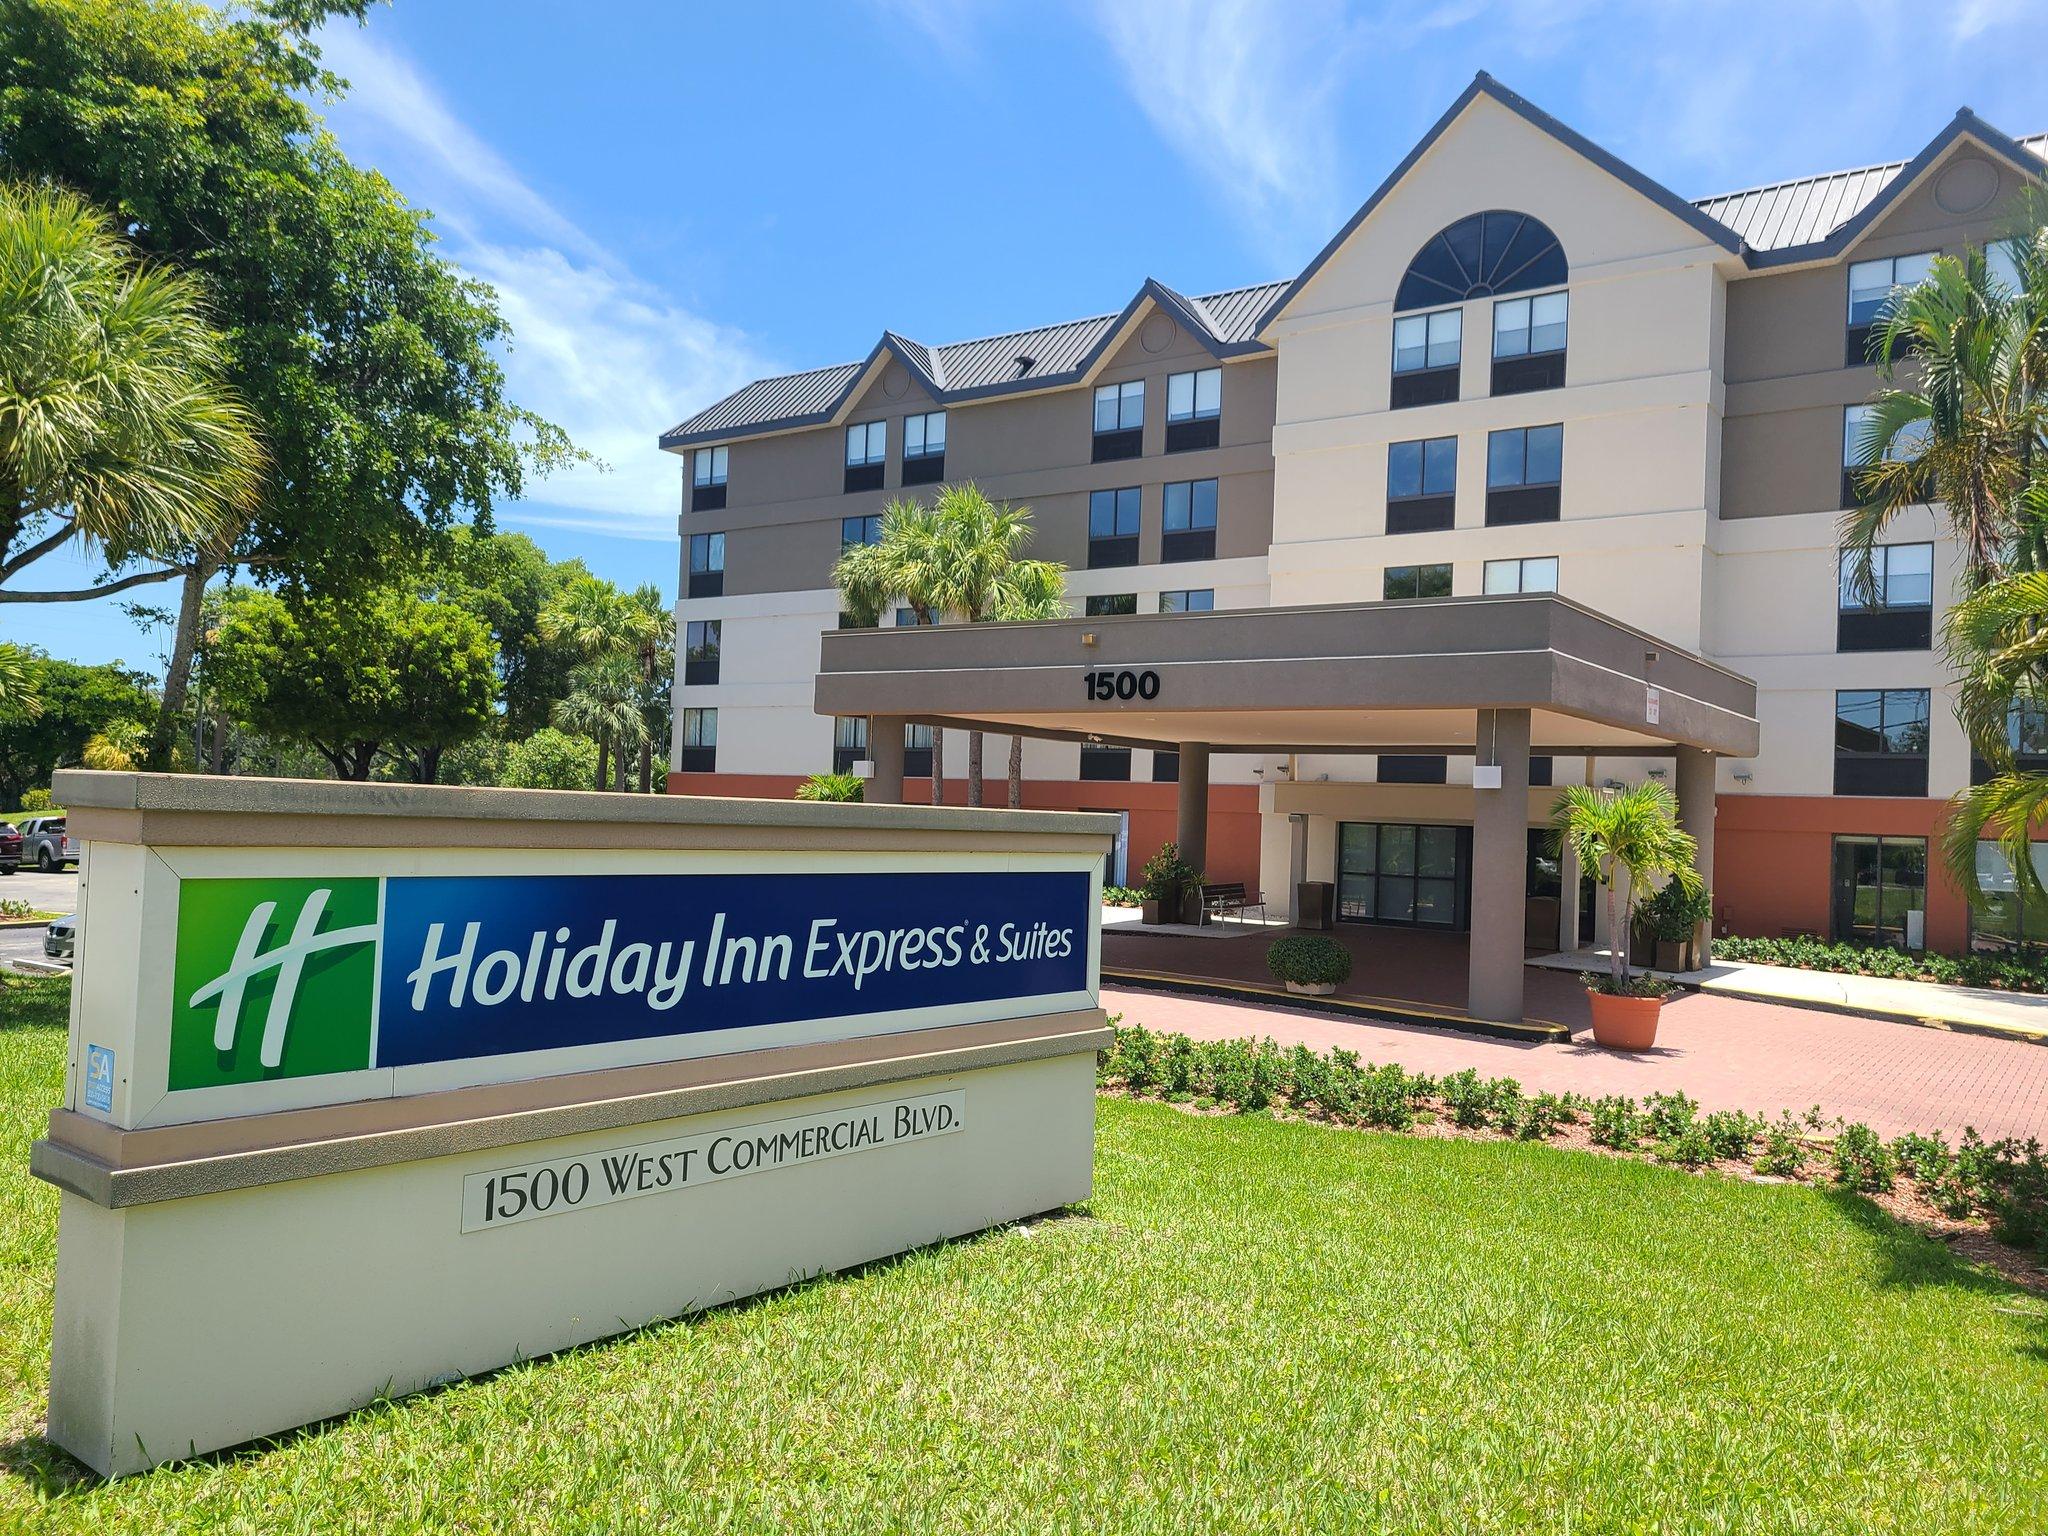 Holiday Inn Express Ft. Lauderdale N- Exec Airport in Fort Lauderdale, FL